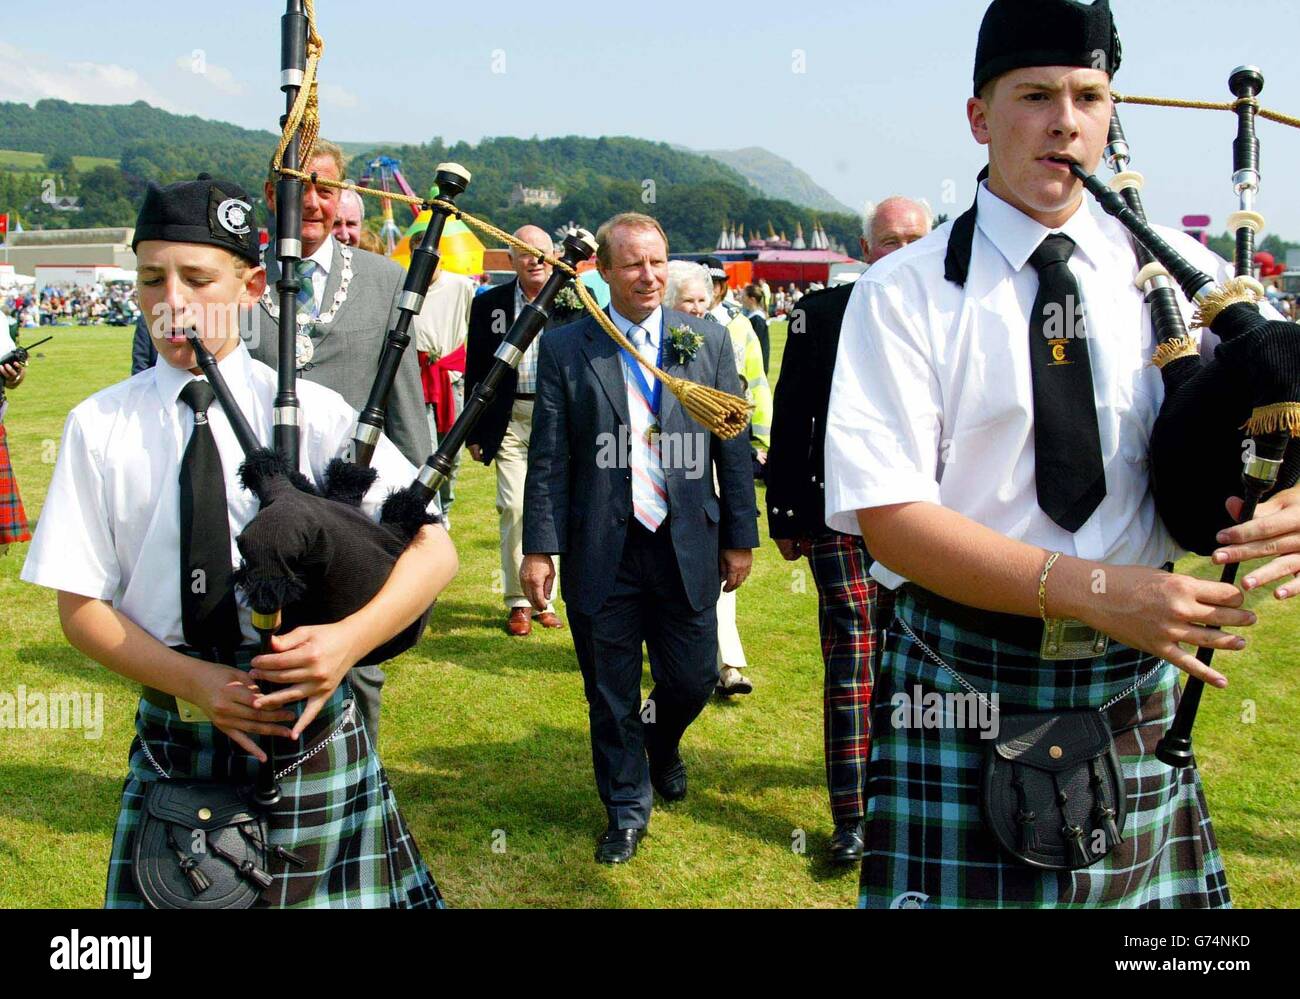 Scotland football manager Berti Vogts walks behind bagpipers at Bridge of Allan Highland Games near Stirling, where he is head Chieftan at this years games. Stock Photo